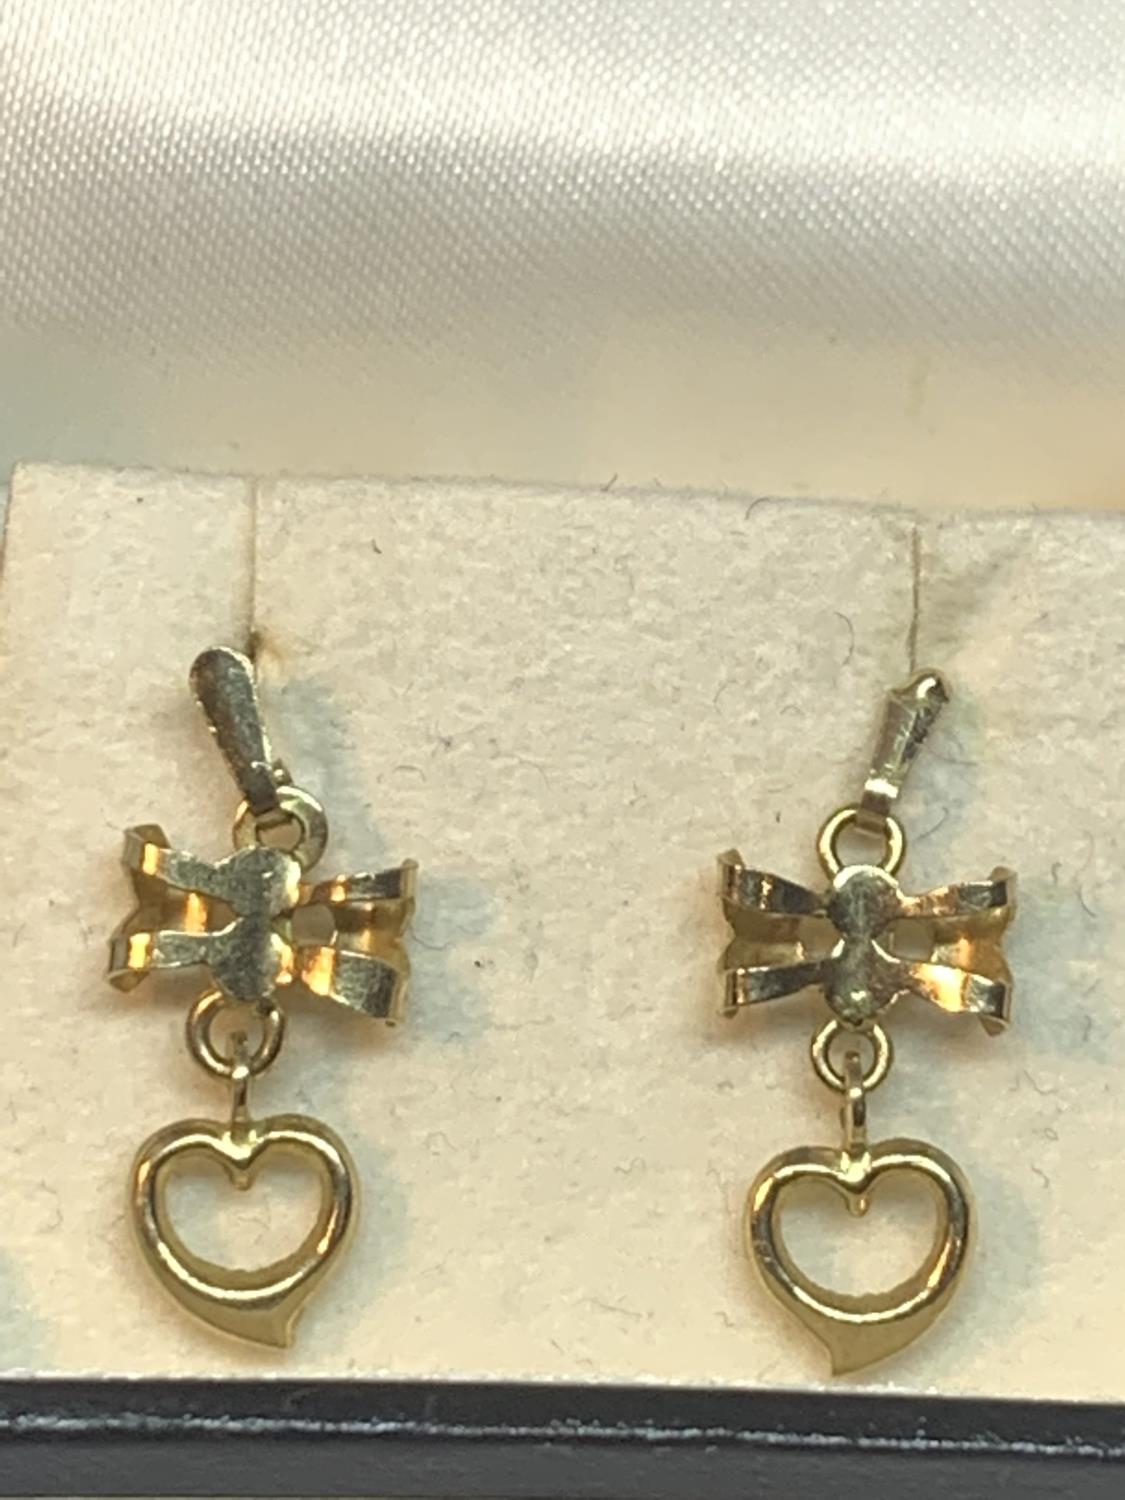 A PAIR OF 9 CARAT GOLD BOW AND HEART DESIGN EARRINGS IN A PRESENTATION BOX